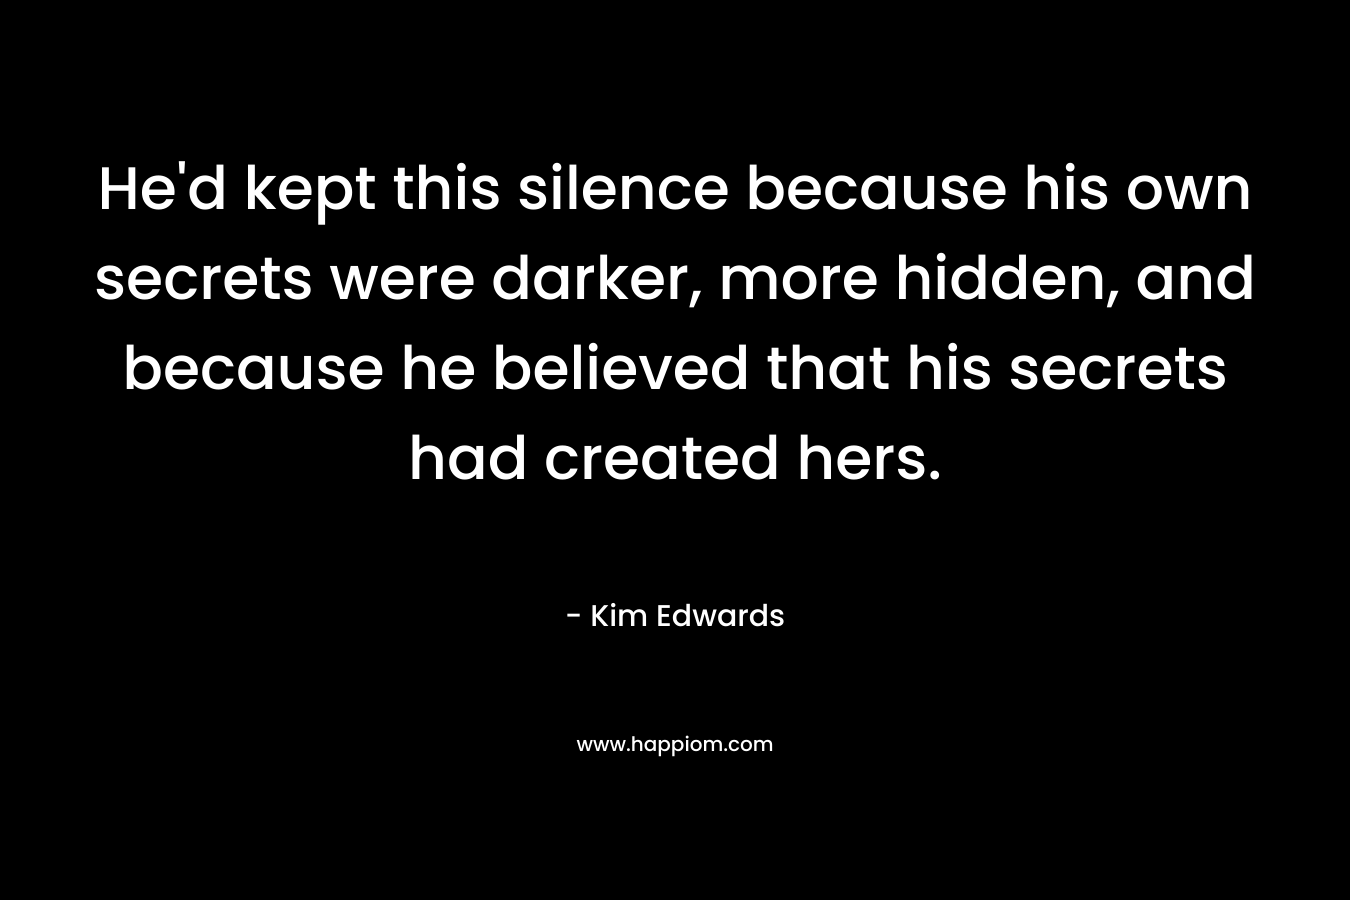 He’d kept this silence because his own secrets were darker, more hidden, and because he believed that his secrets had created hers. – Kim Edwards